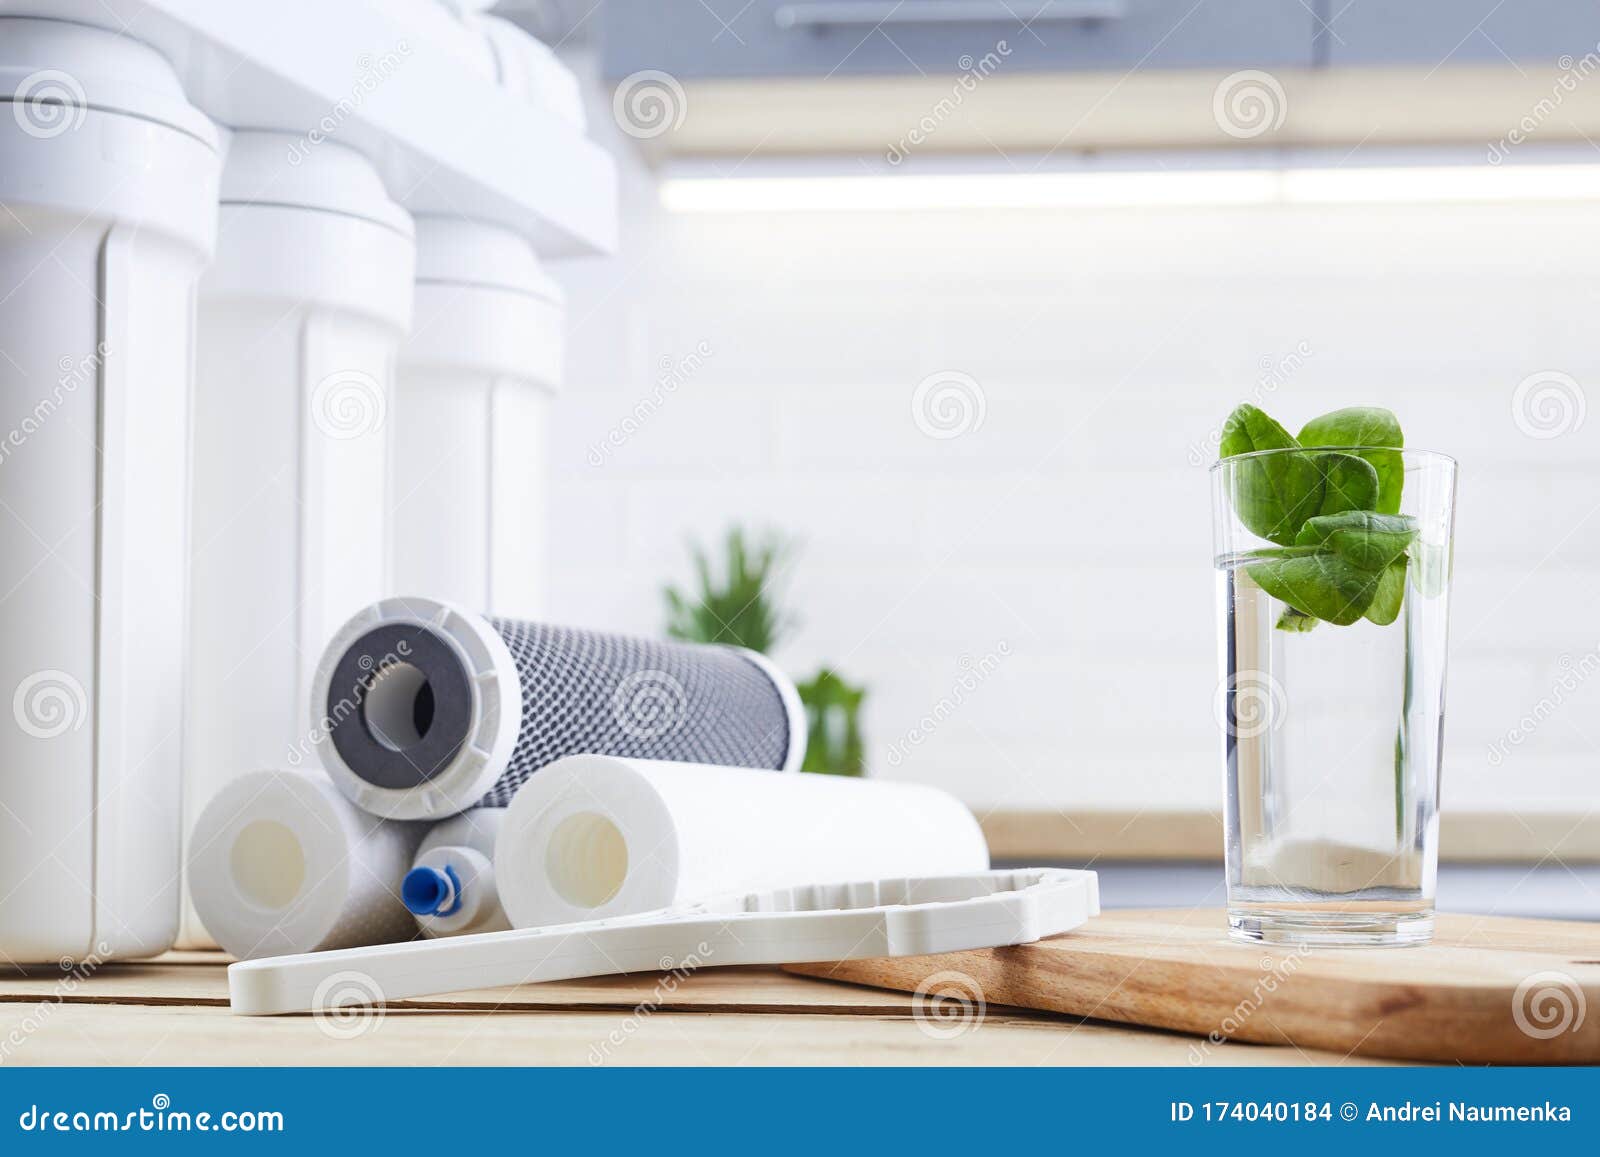 a glass of clean water with osmosis filter and cartridges a kitchen interior. concept household filtration system